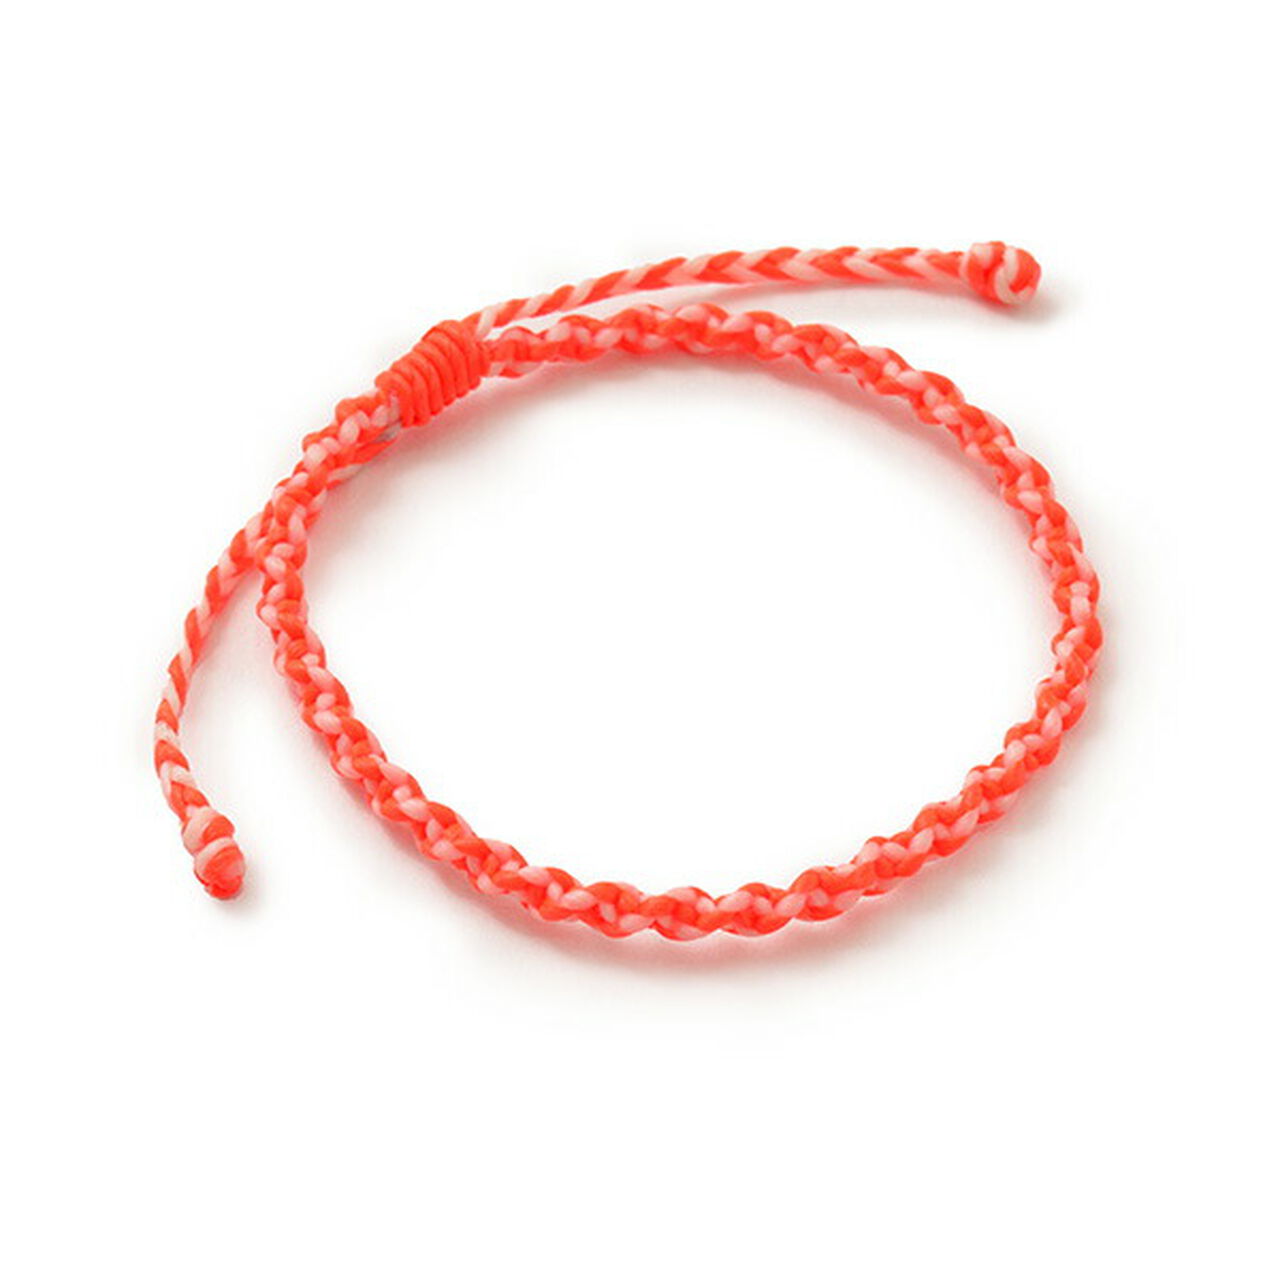 Anklet Wax Cord 2 Tone,NeonOrange_White, large image number 0